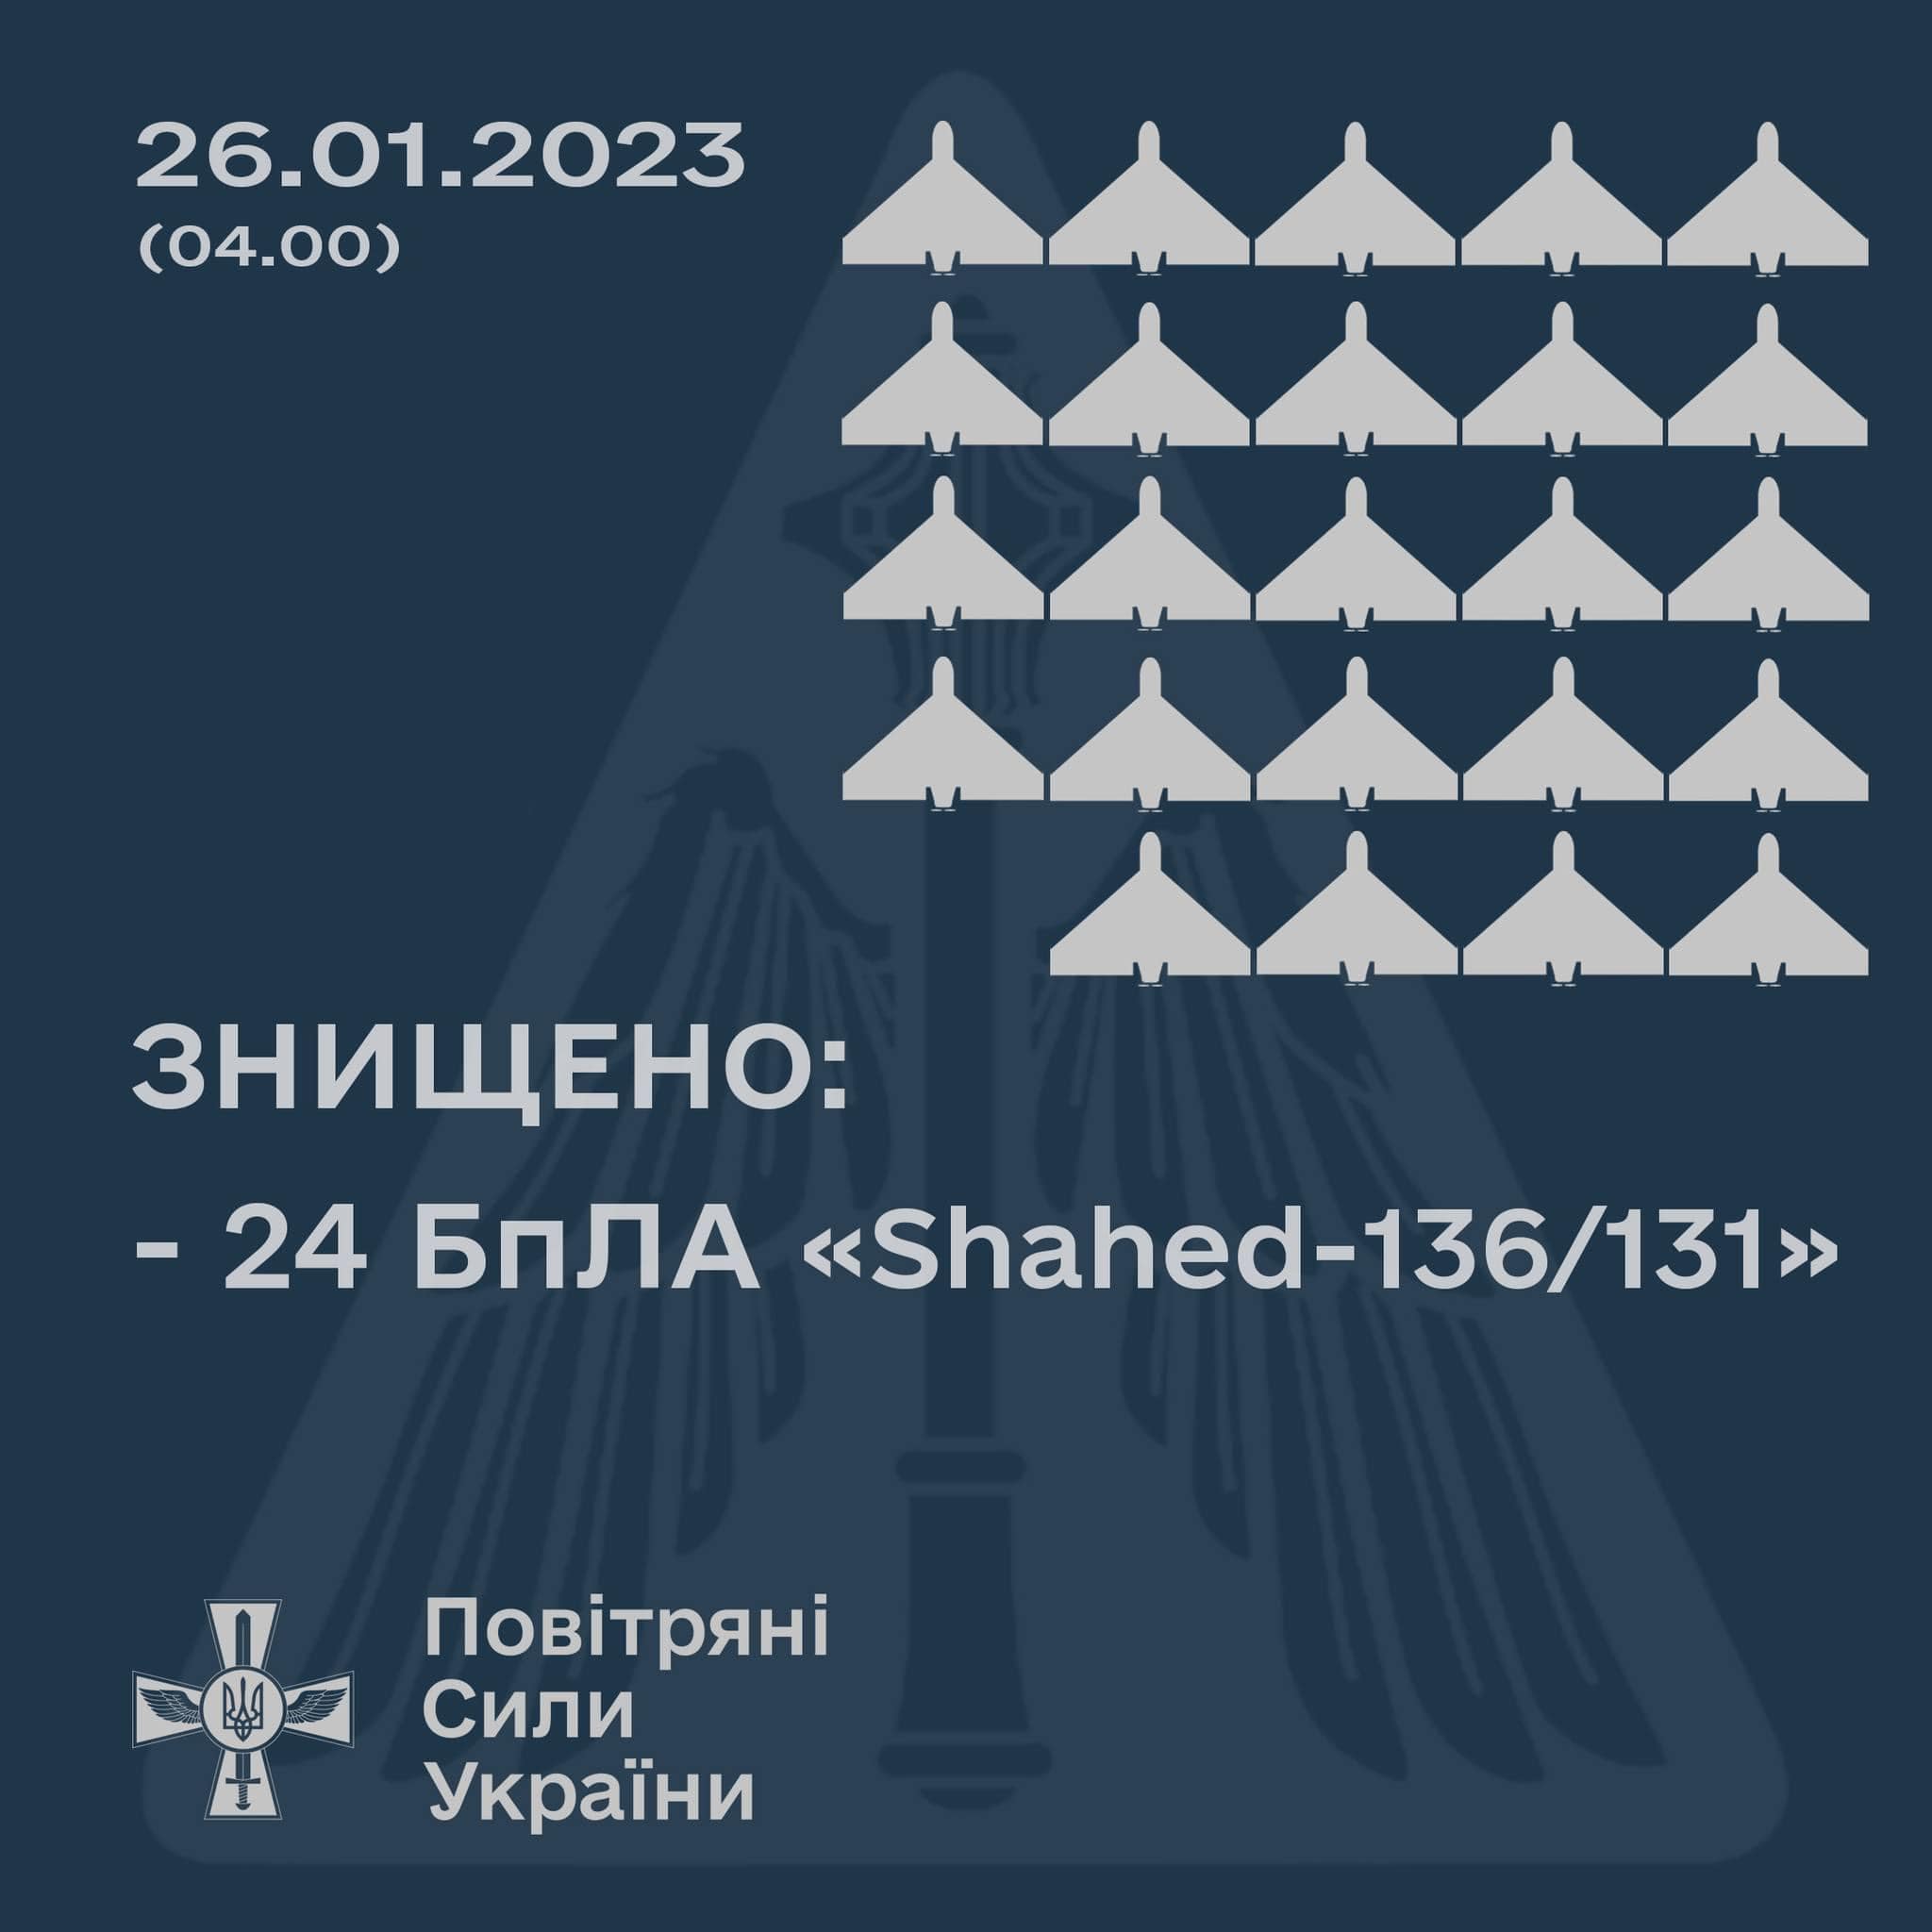 Ukraine Attacked with 24 Shahed-136/131 Kamikaze Drones This Night